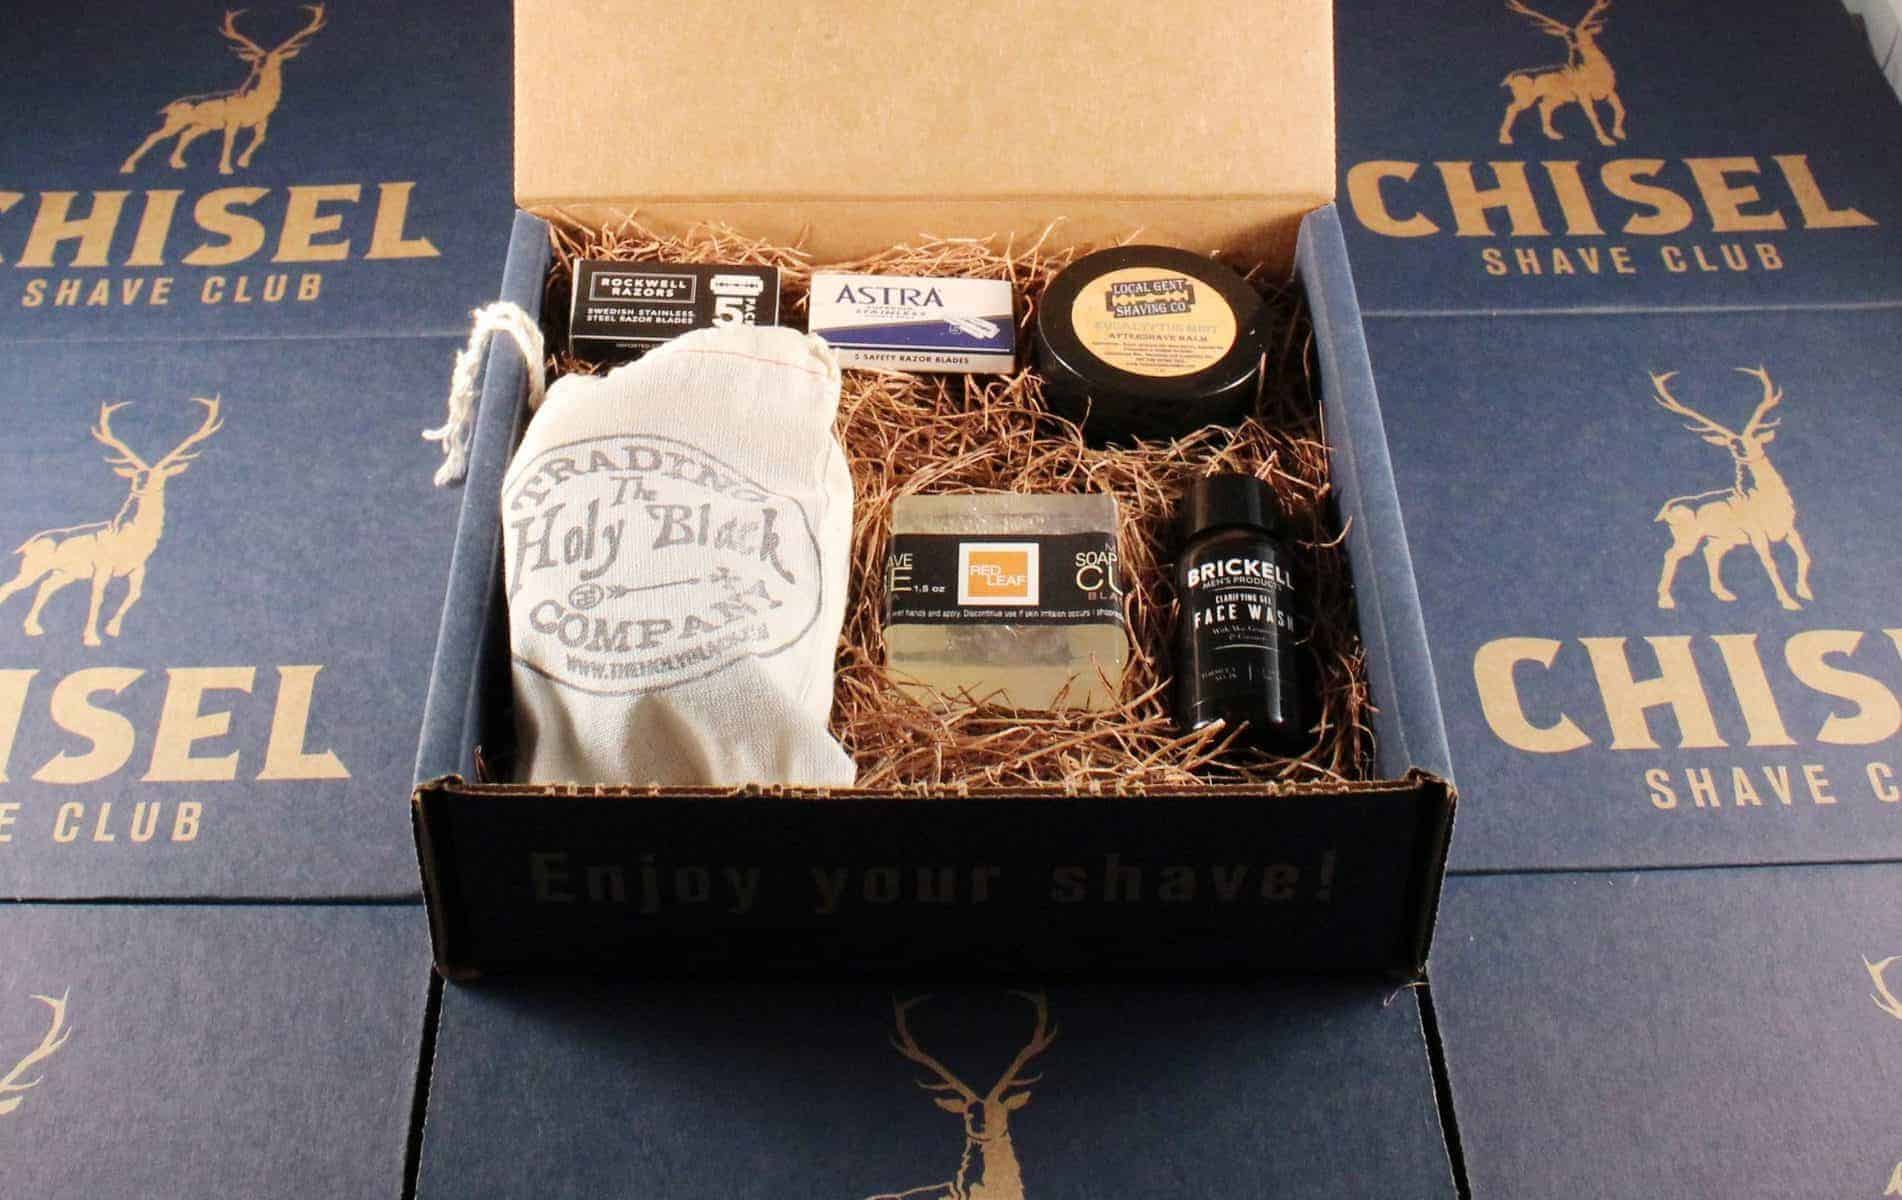 Chisel Shave Club